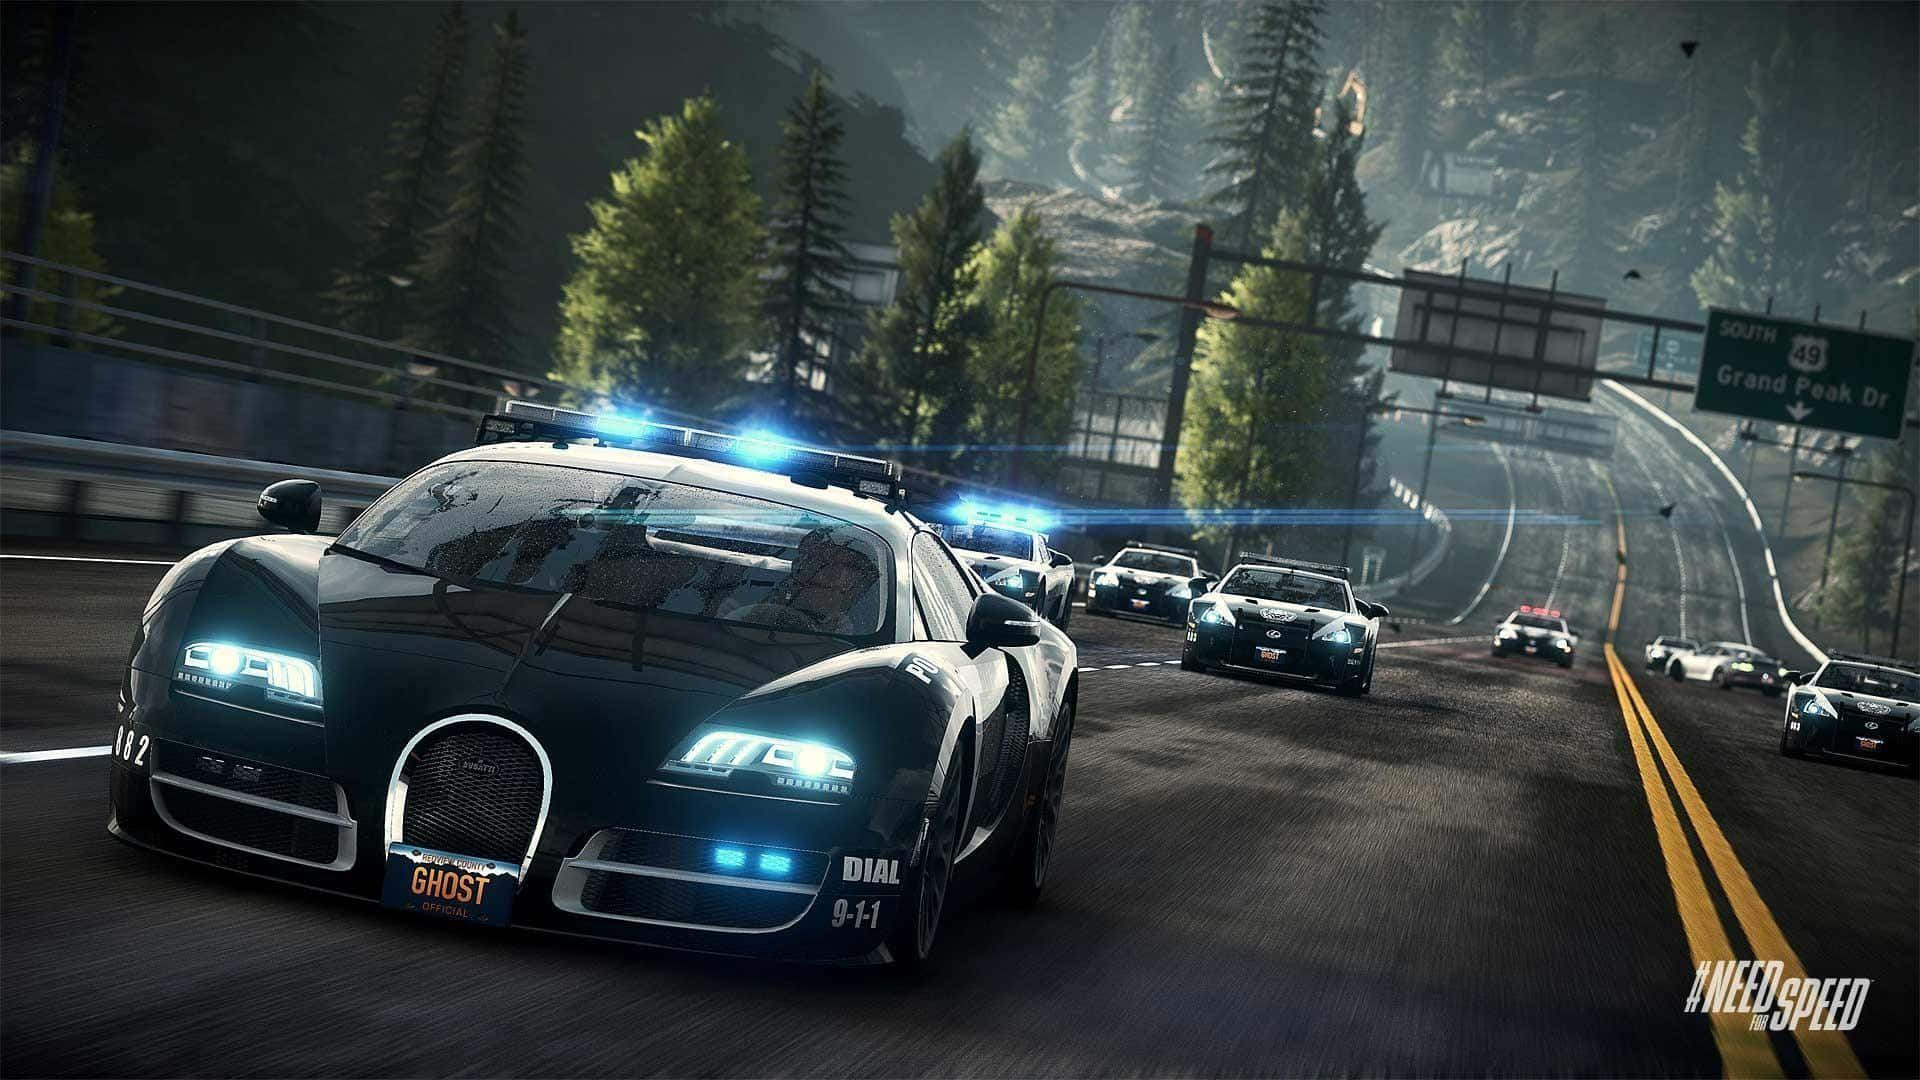 Black Bugatti Veyron In Need For Speed PC Wallpaper